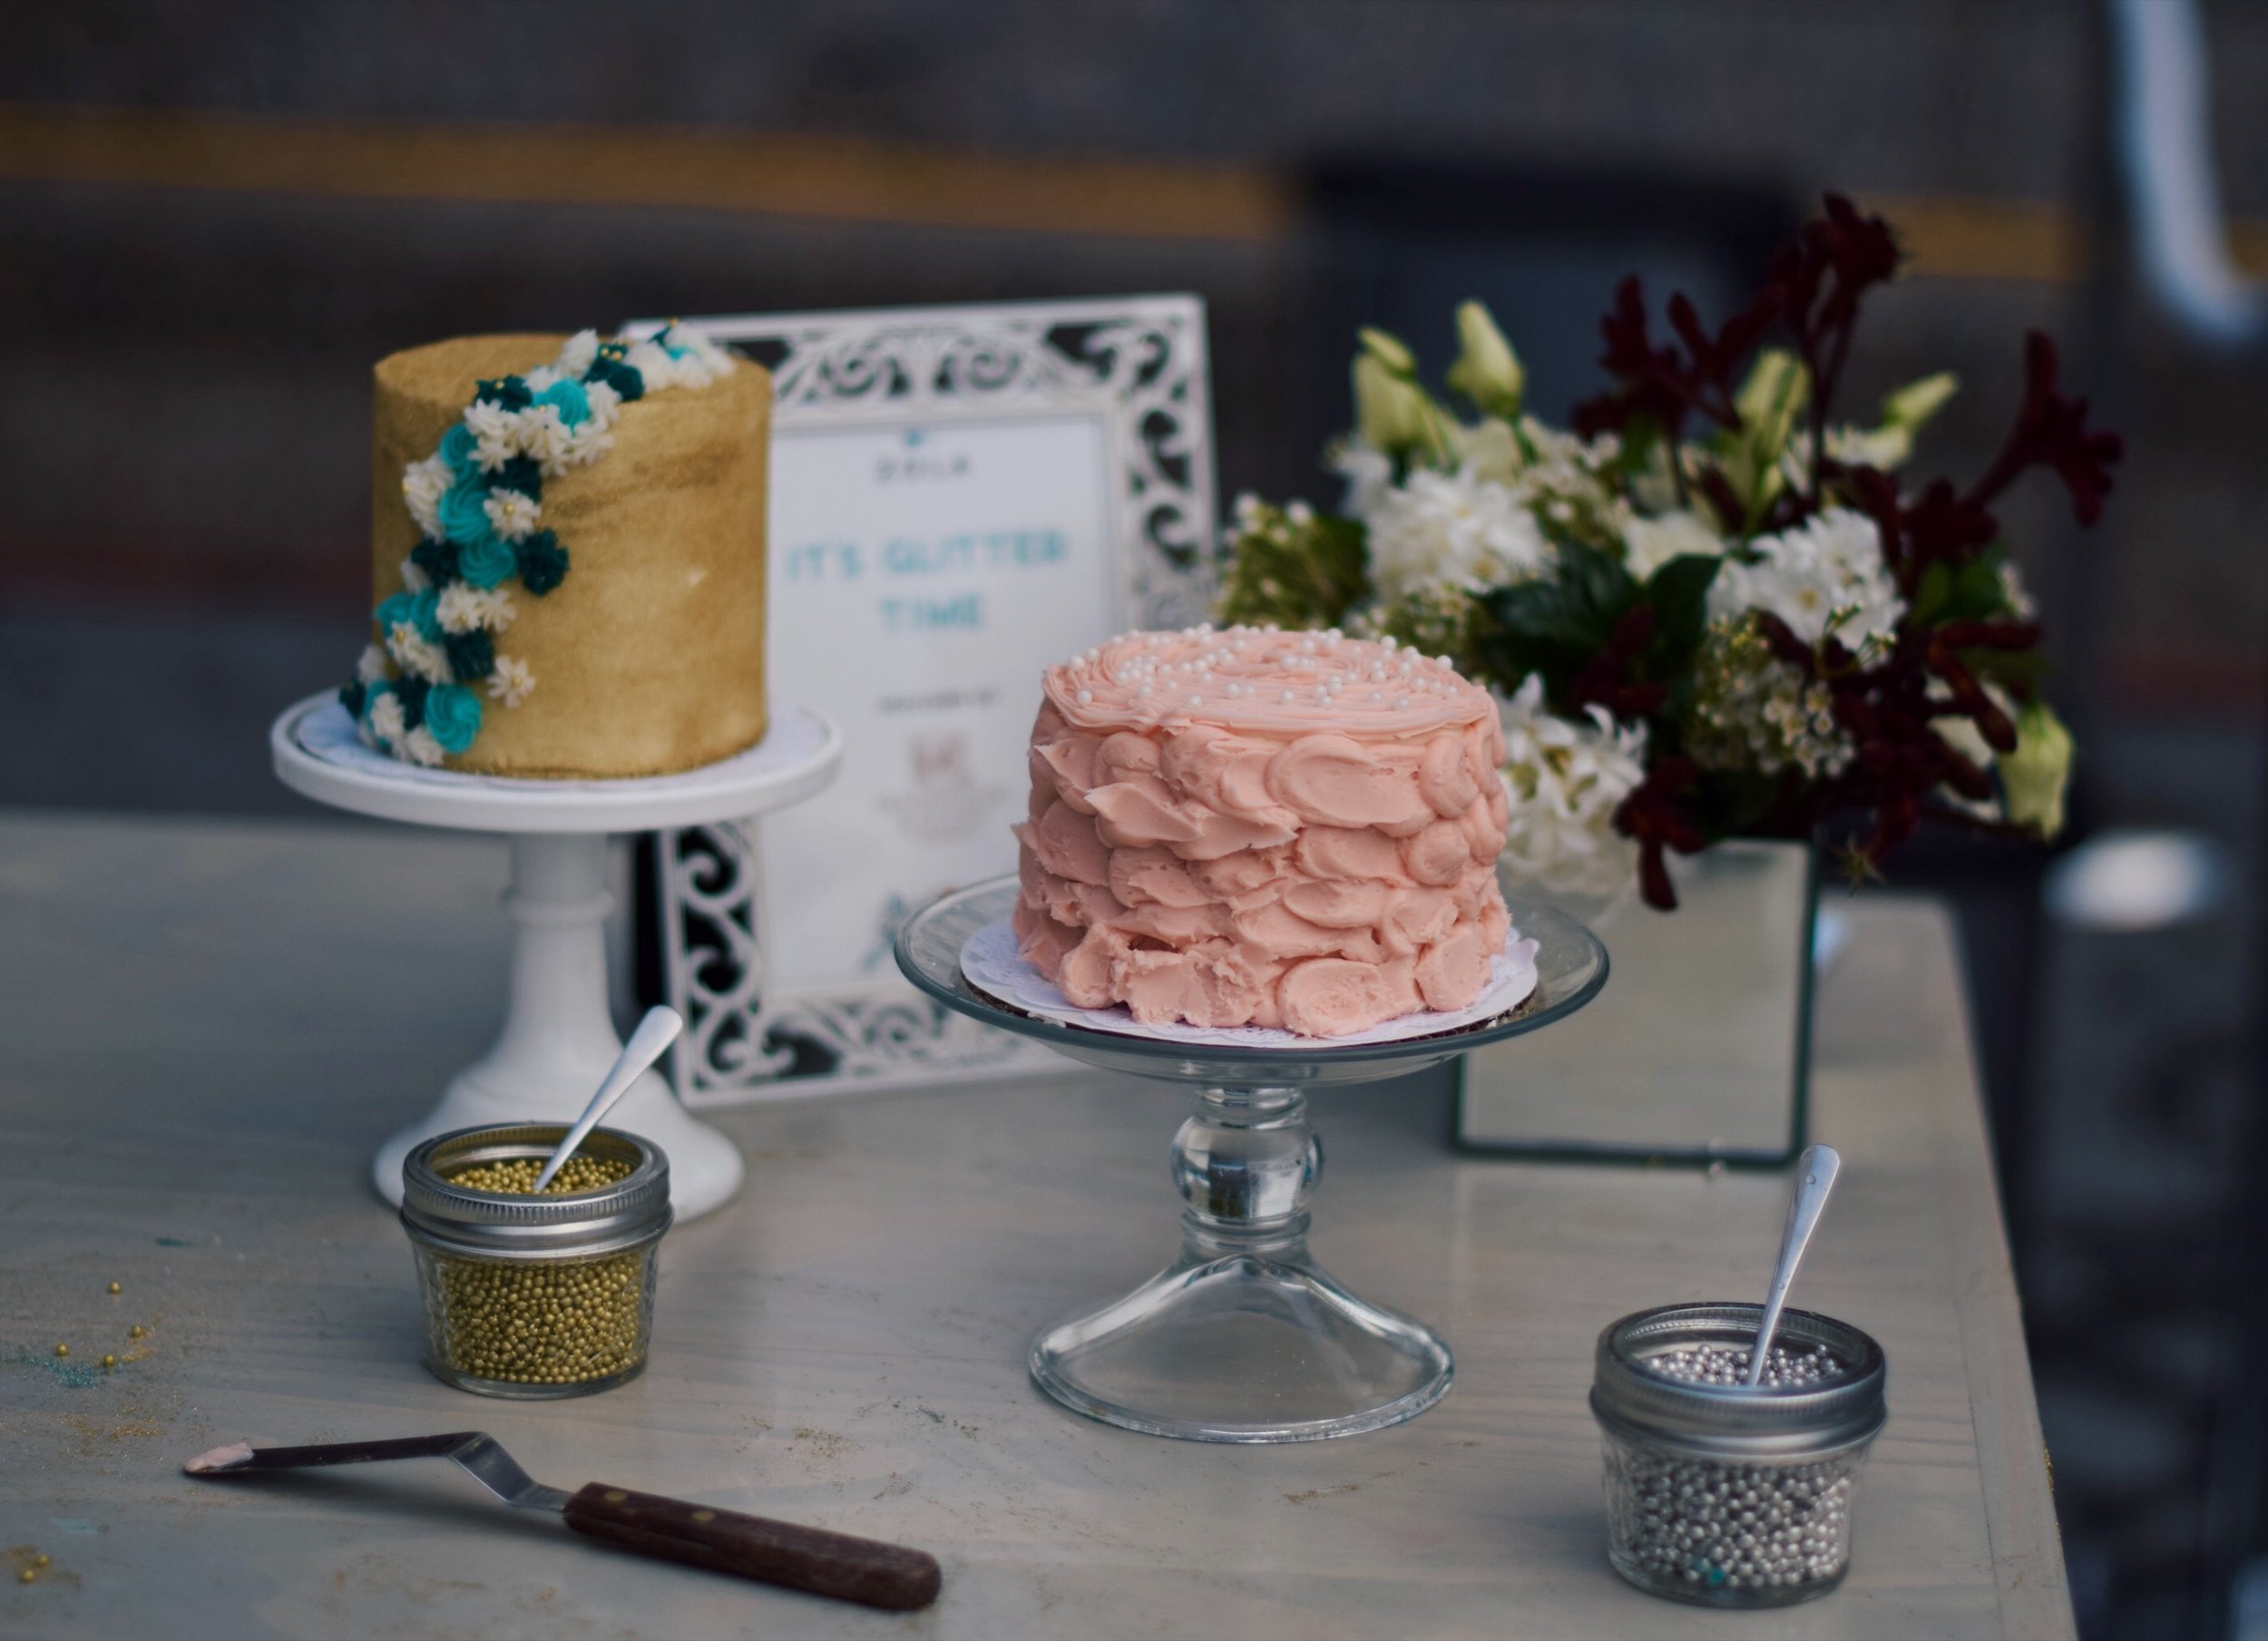 Cake Decorating With Zola Esther Santer Fashion Blog NYC Street Style Blogger Outfit OOTD Trendy Balloons Event Registry On Wheels Anything For Love Pink Buttercream Frosting Pearls Glitter Delicious Magnolia Bakery Bride Wedding Registry Vanilla Coat.JPG